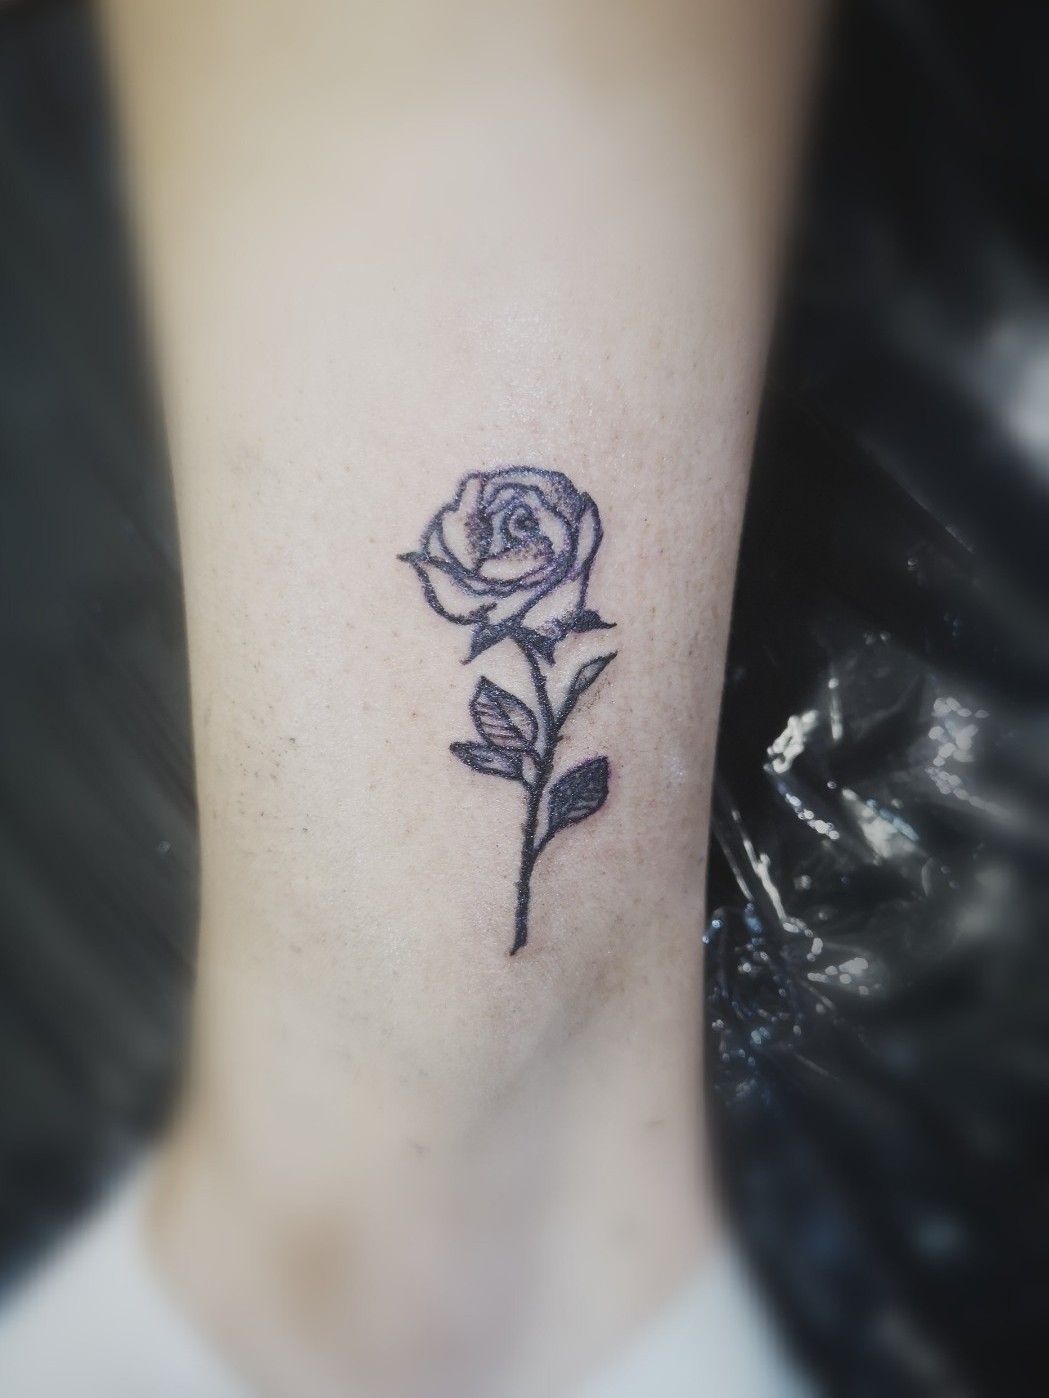 45 Very Provocative Rose Tattoos That Are Sure to Catch the Eye